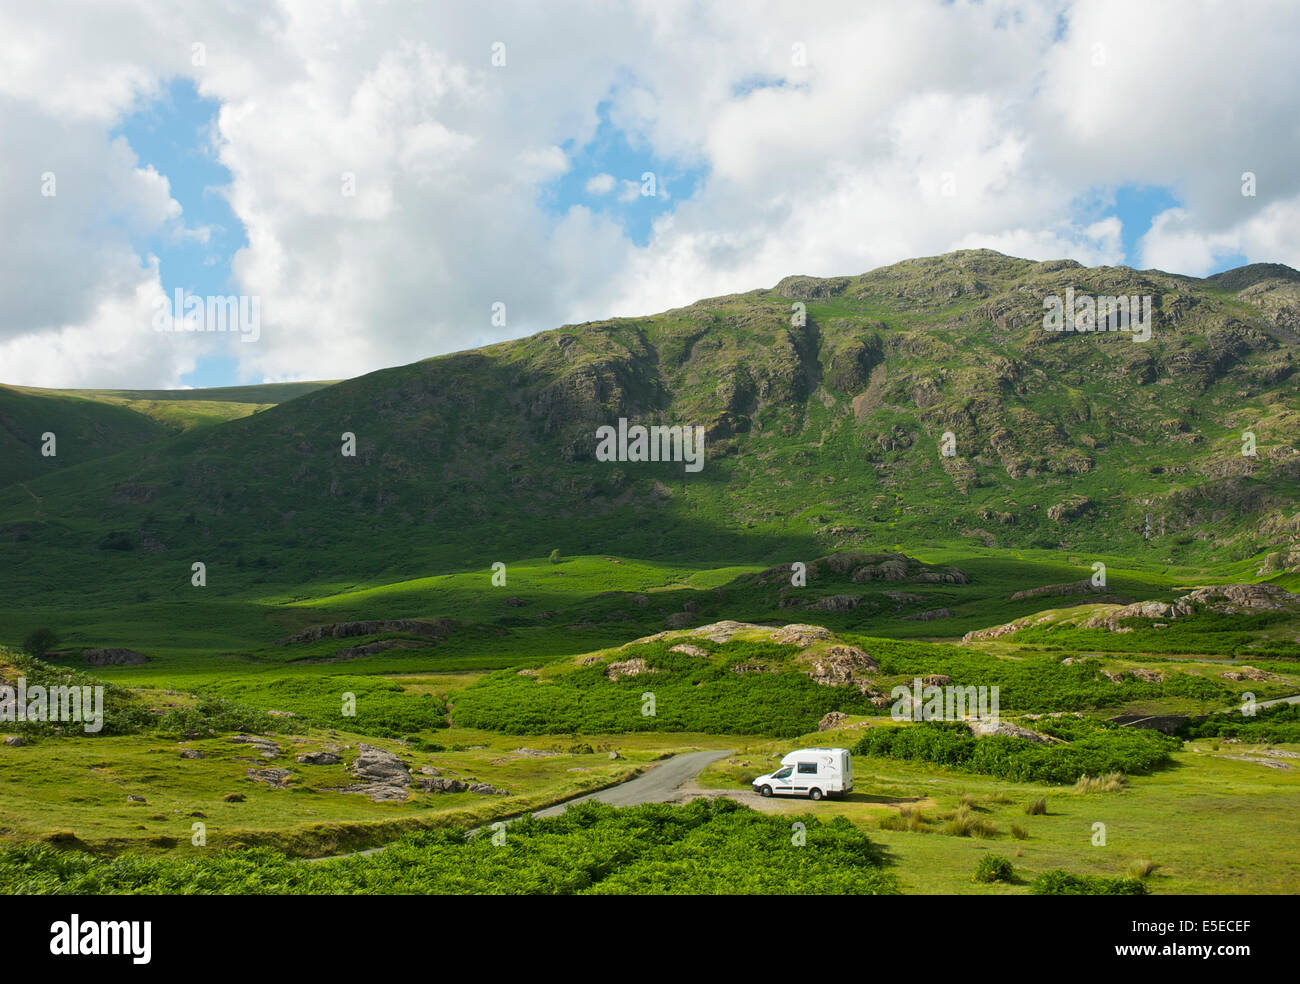 Romahome R25 motorhome parked in Wasdale, Lake District National Park, Cumbria, England UK Stock Photo